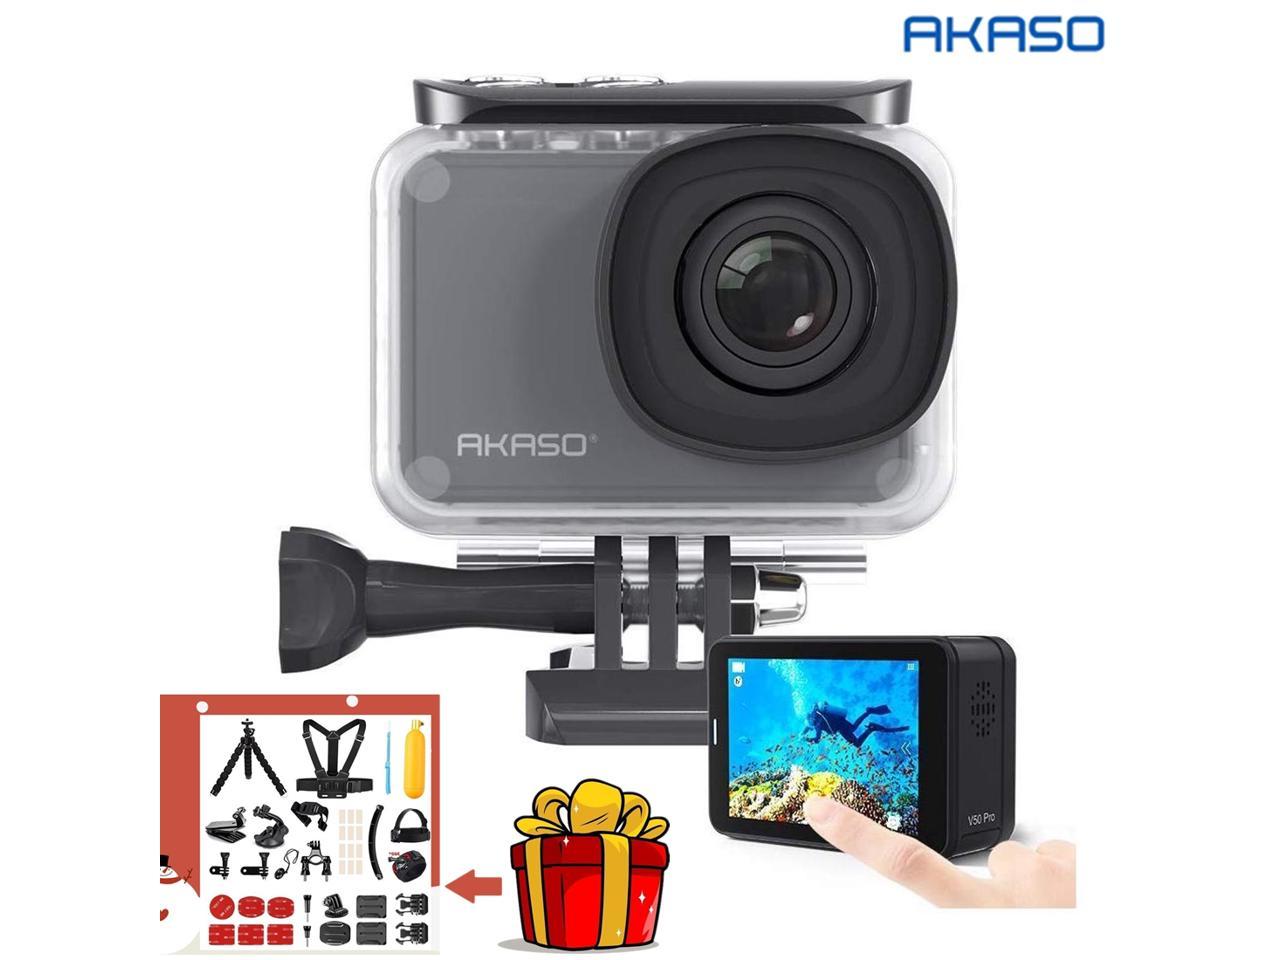 AKASO V50 Pro Native 4K30fps 20MP WiFi Action Camera with EIS Touch Screen 100 feet Waterproof Camera Support External Mic Remote Control Sports Camera with Helmet Accessories Kit